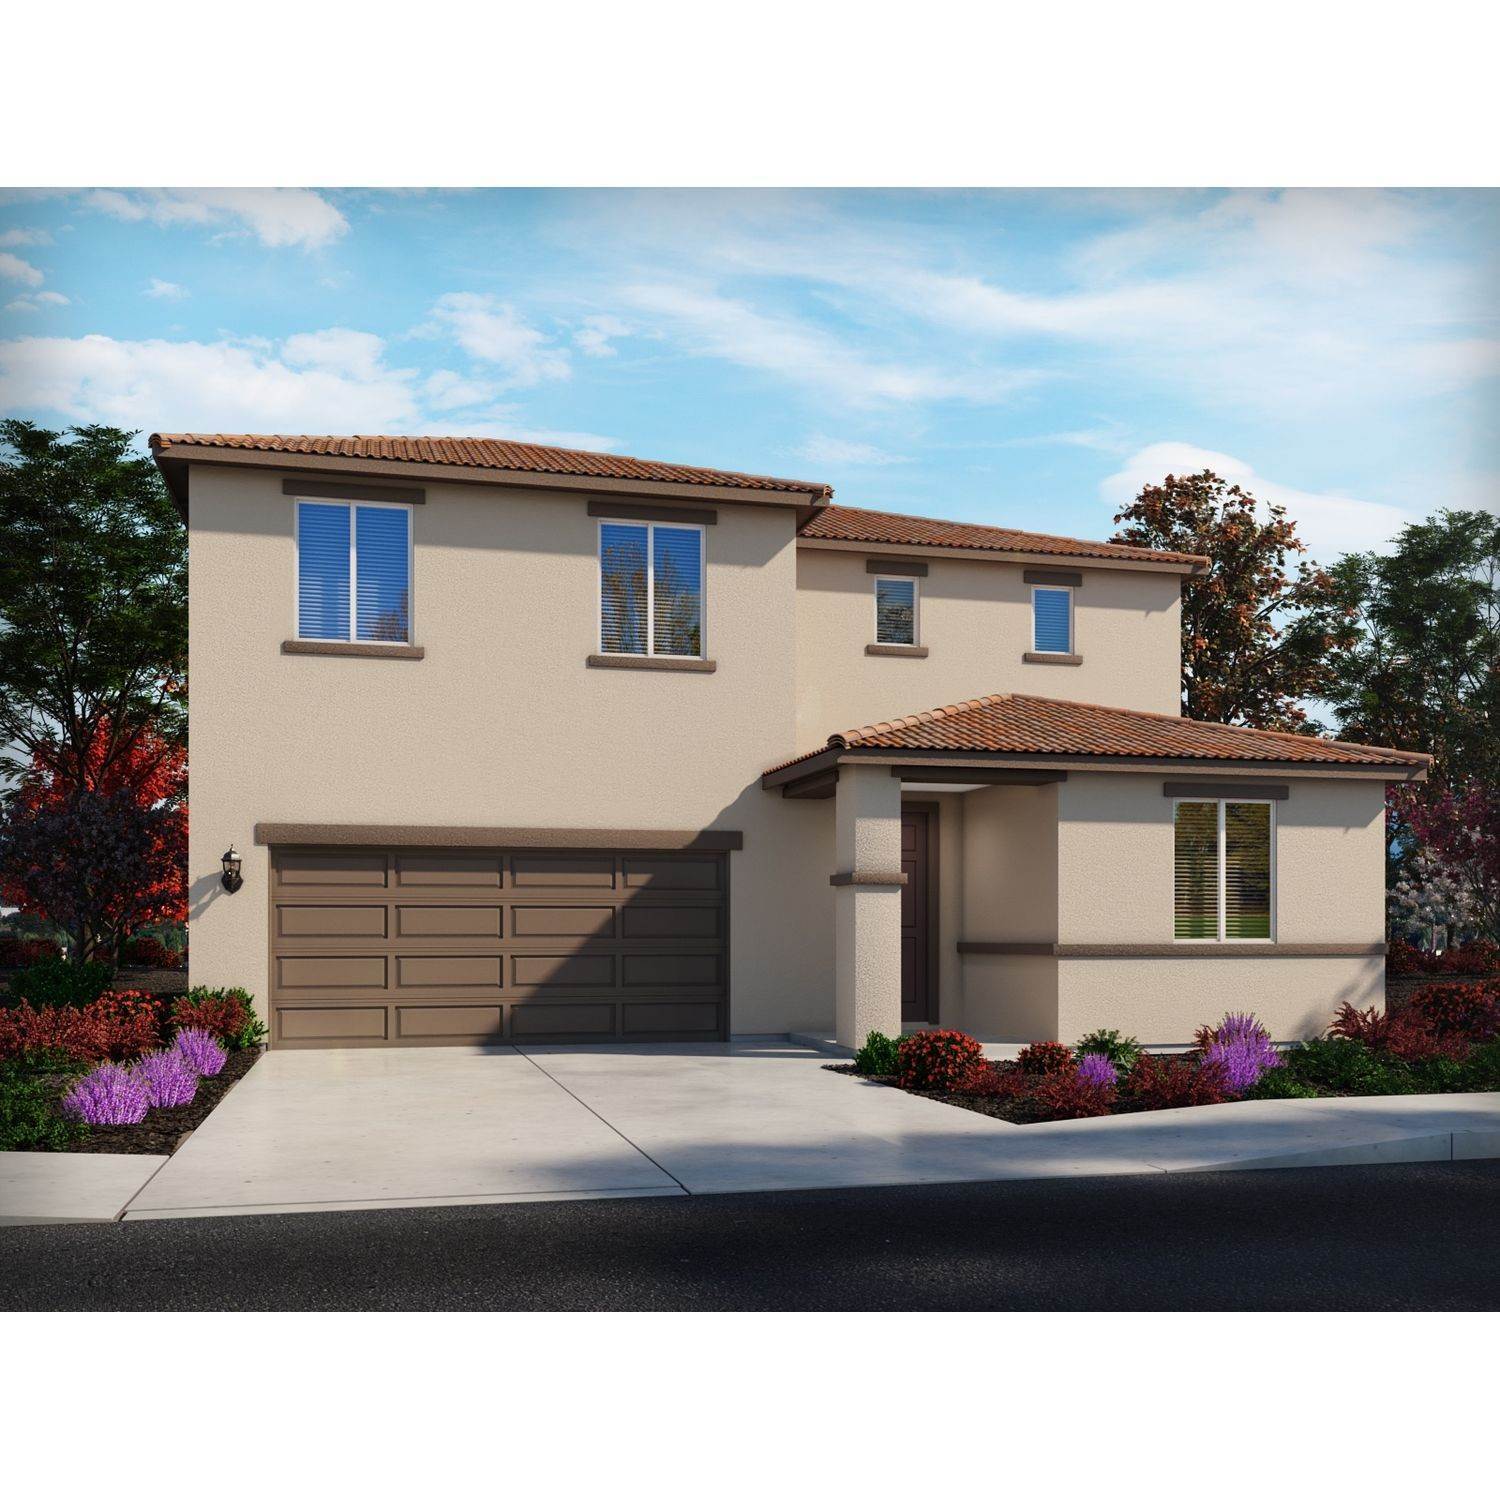 Single Family for Sale at Linden At Arbor Bend 1849 Holland Lane, Manteca, CA 95337